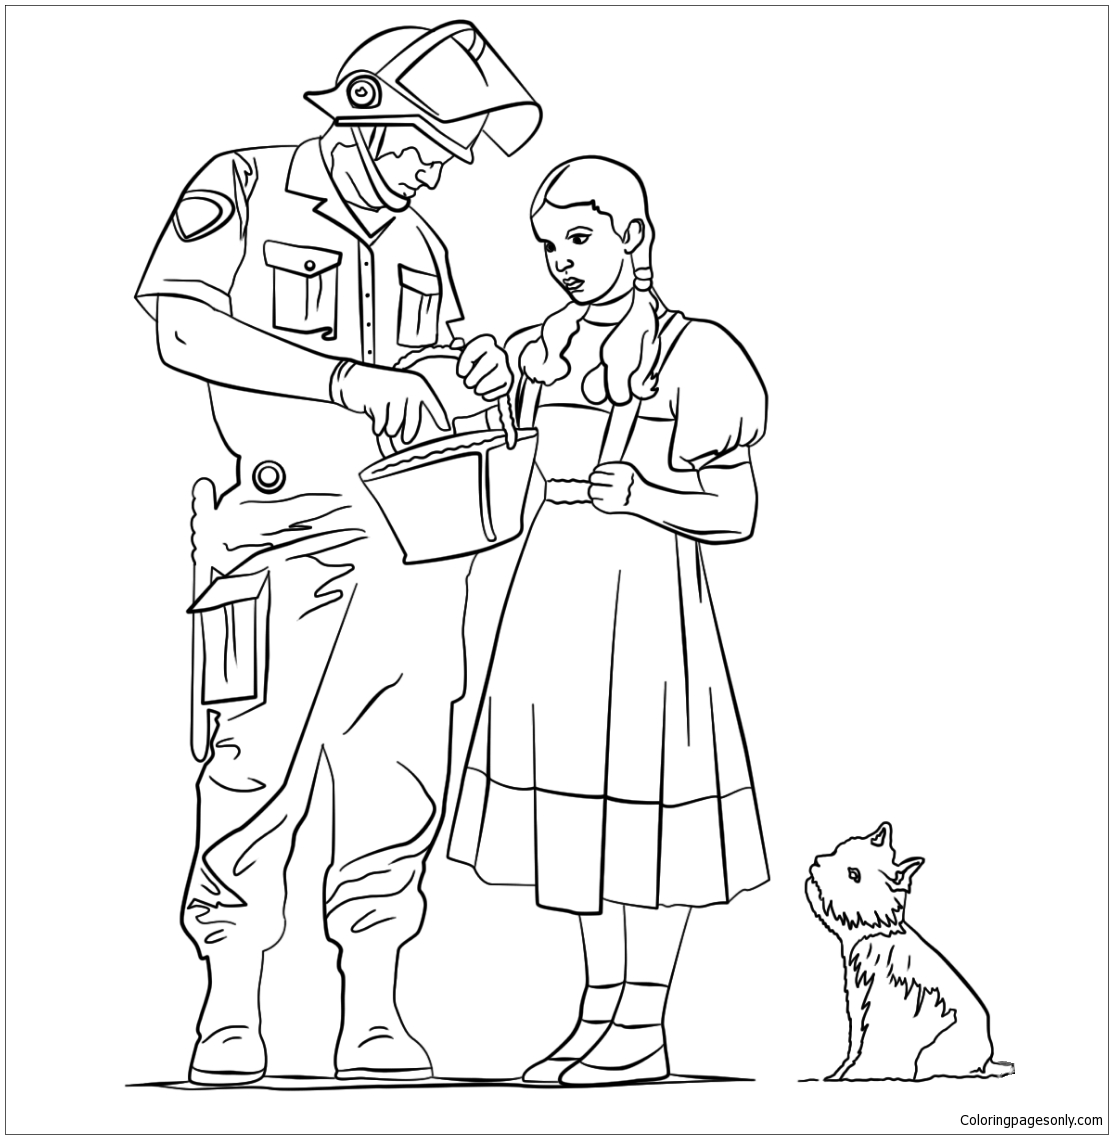 Stop and Search by Banksy Coloring Pages